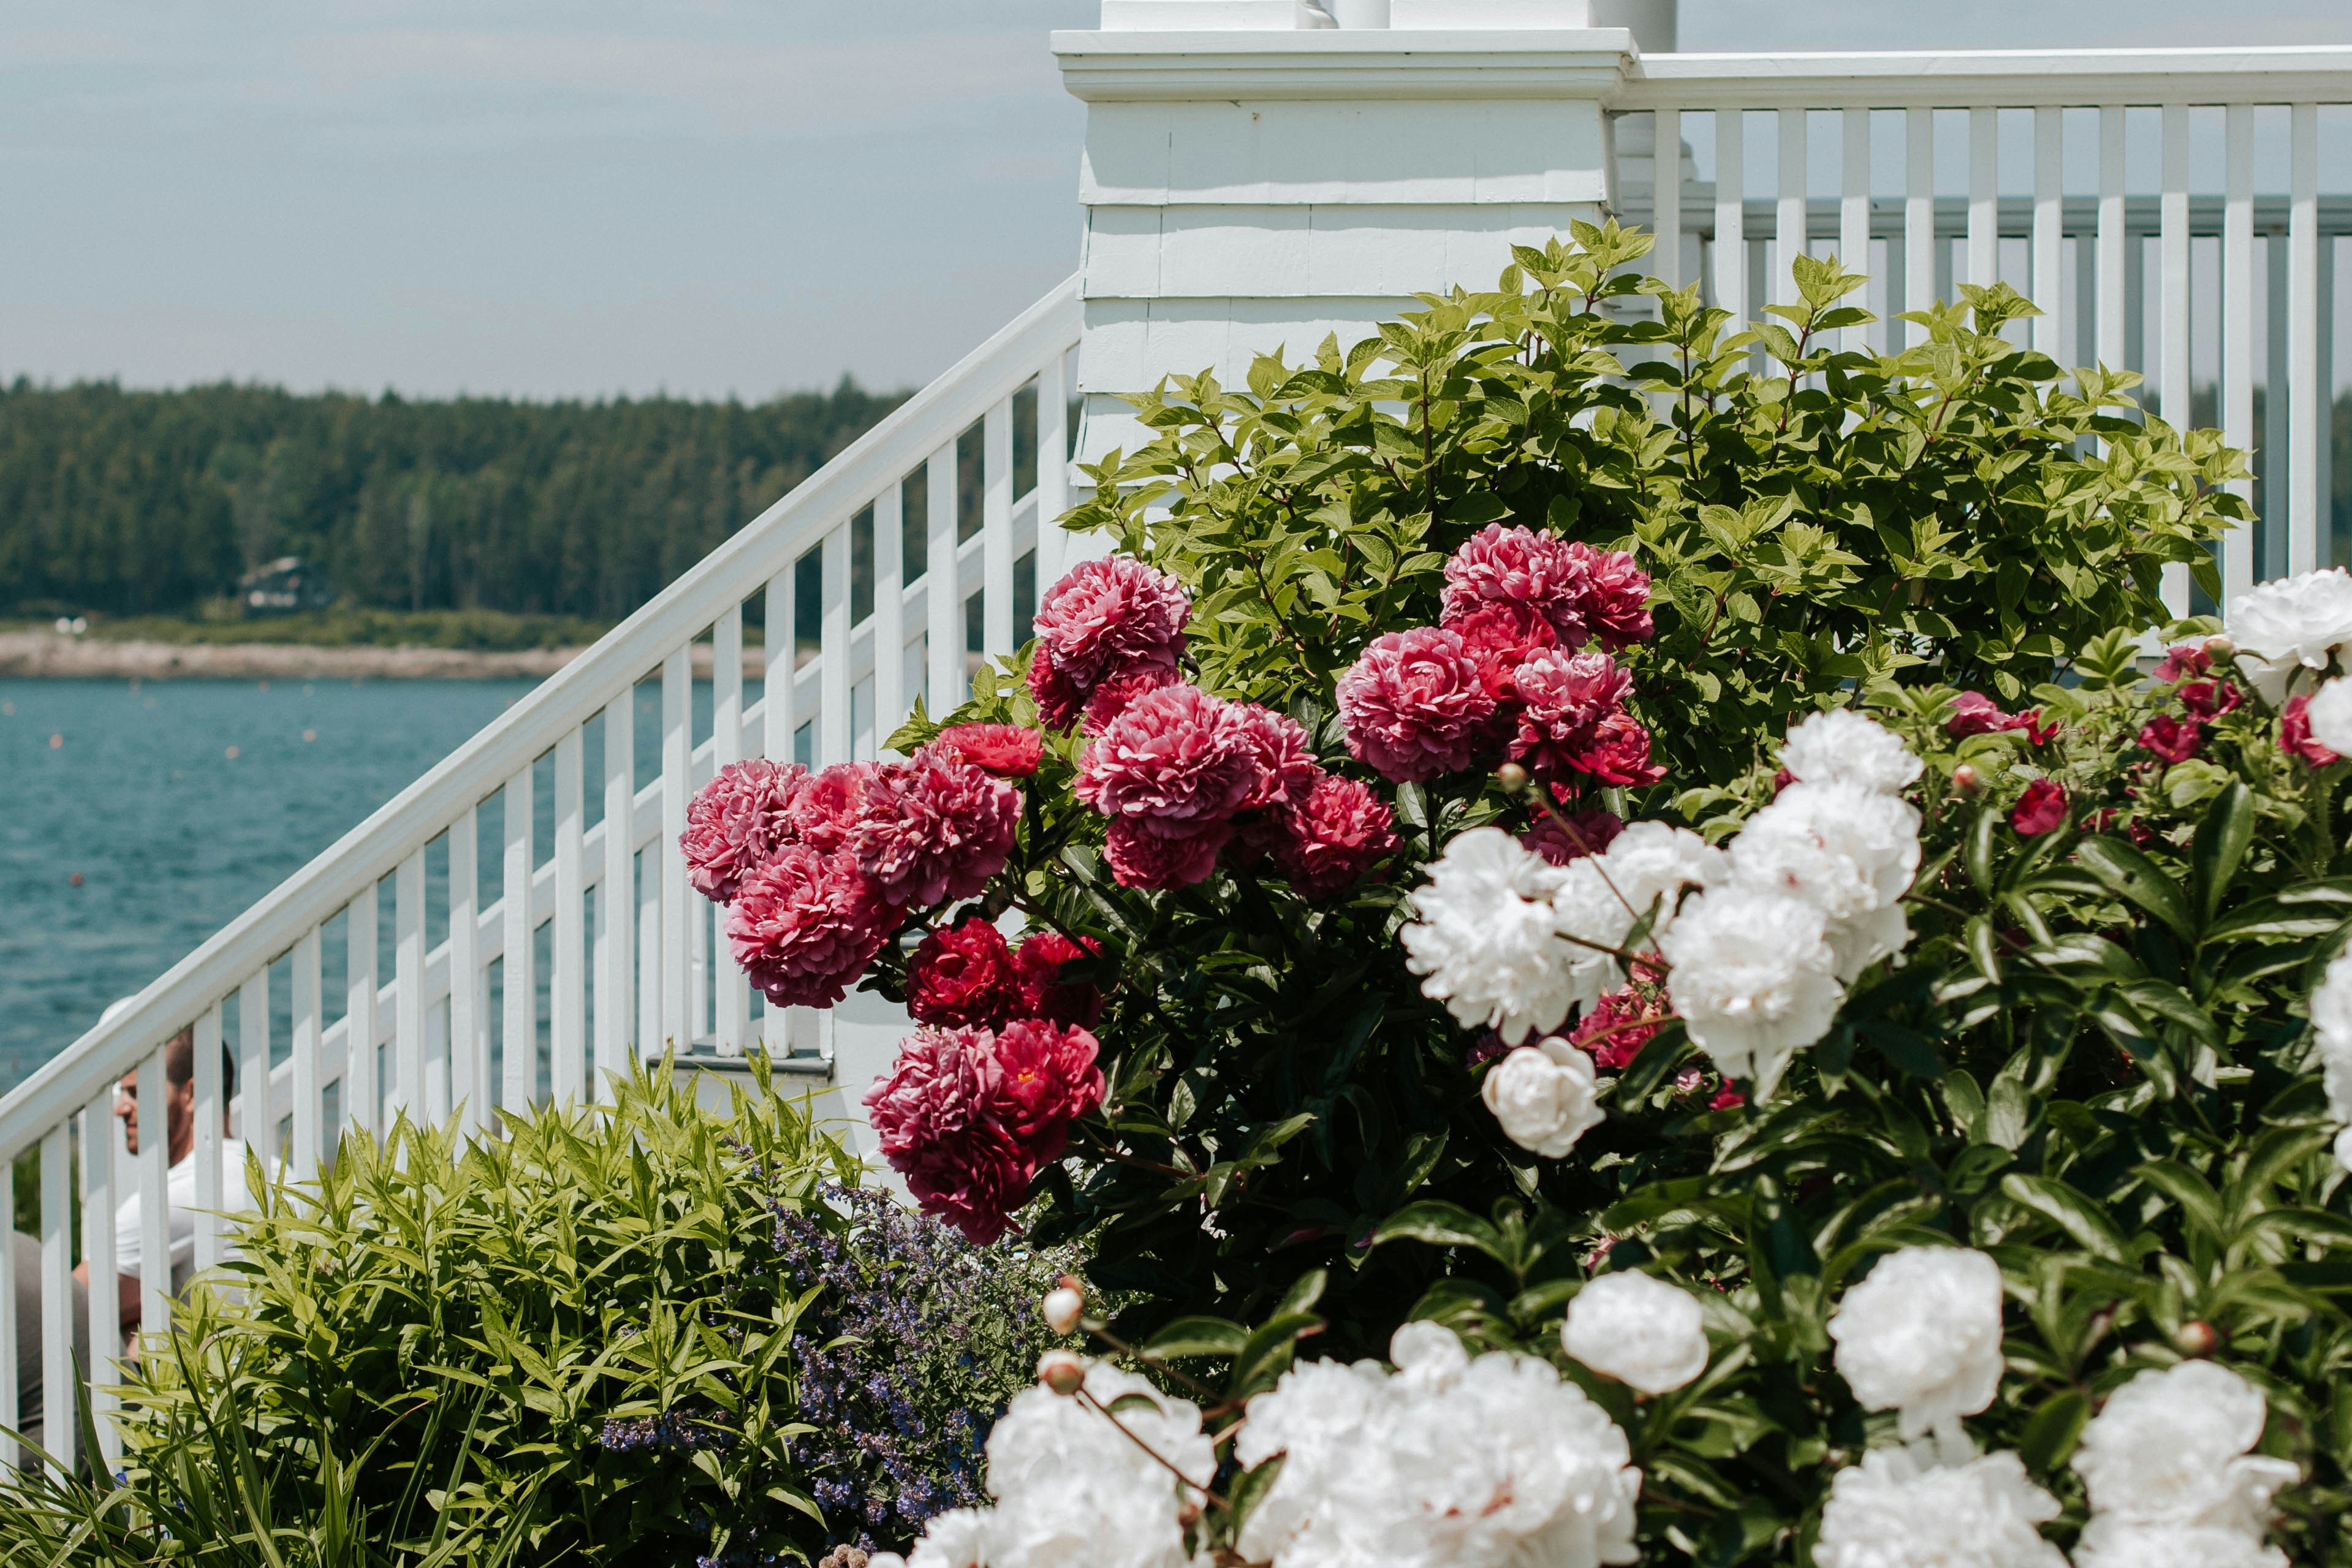 Some pink and white roses outside on the grounds of the Marshall Point lighthouse.